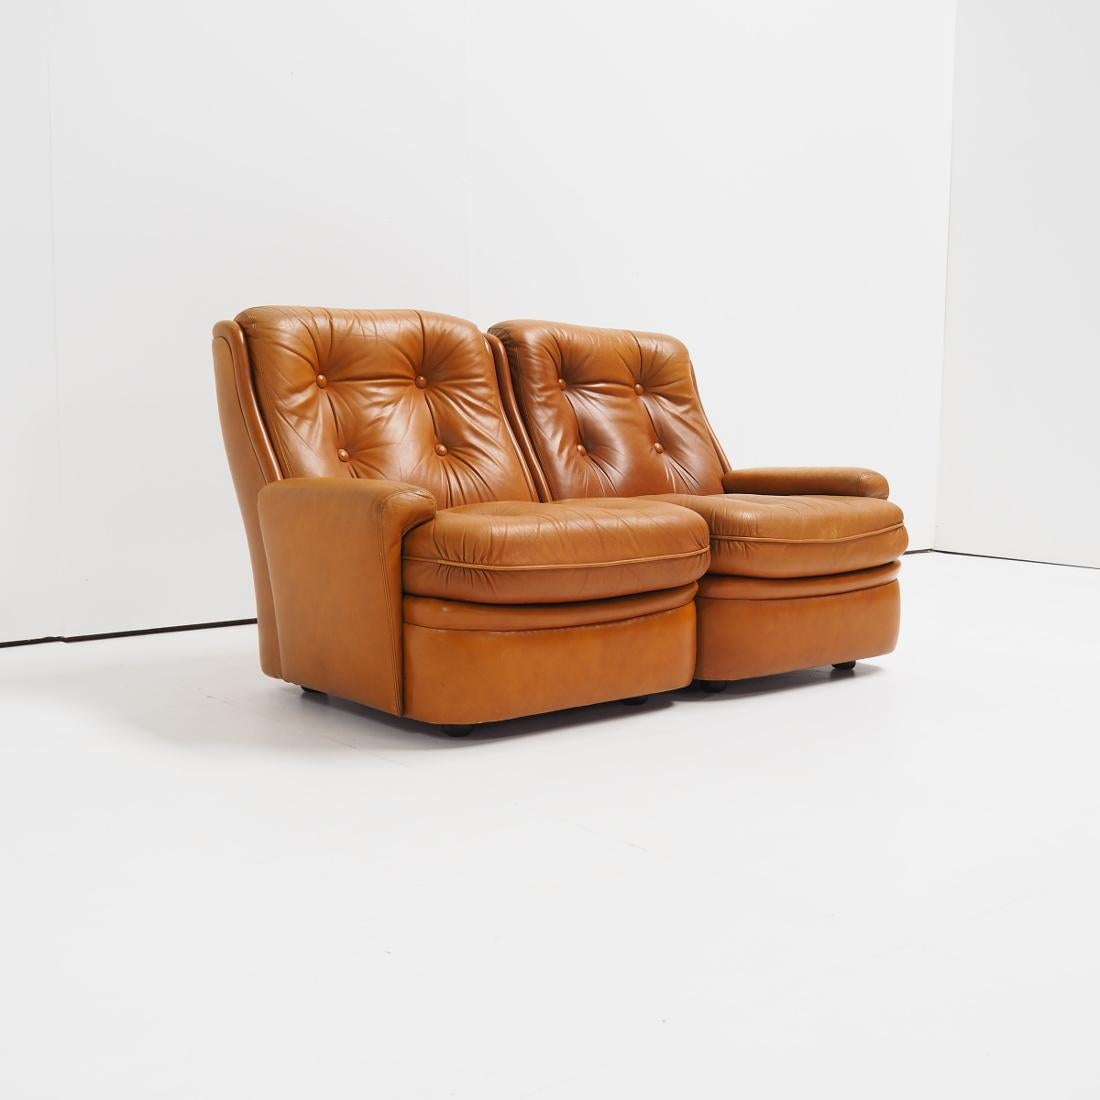 This 1970s leather two-seater from the ‘Orchidée’ series designed by Michel Cadestin for Airborne looks like it came straight out of the movie 'a clockwork orange'. How 70s is this sofa? And like all Airborne furniture this sofa too is because of